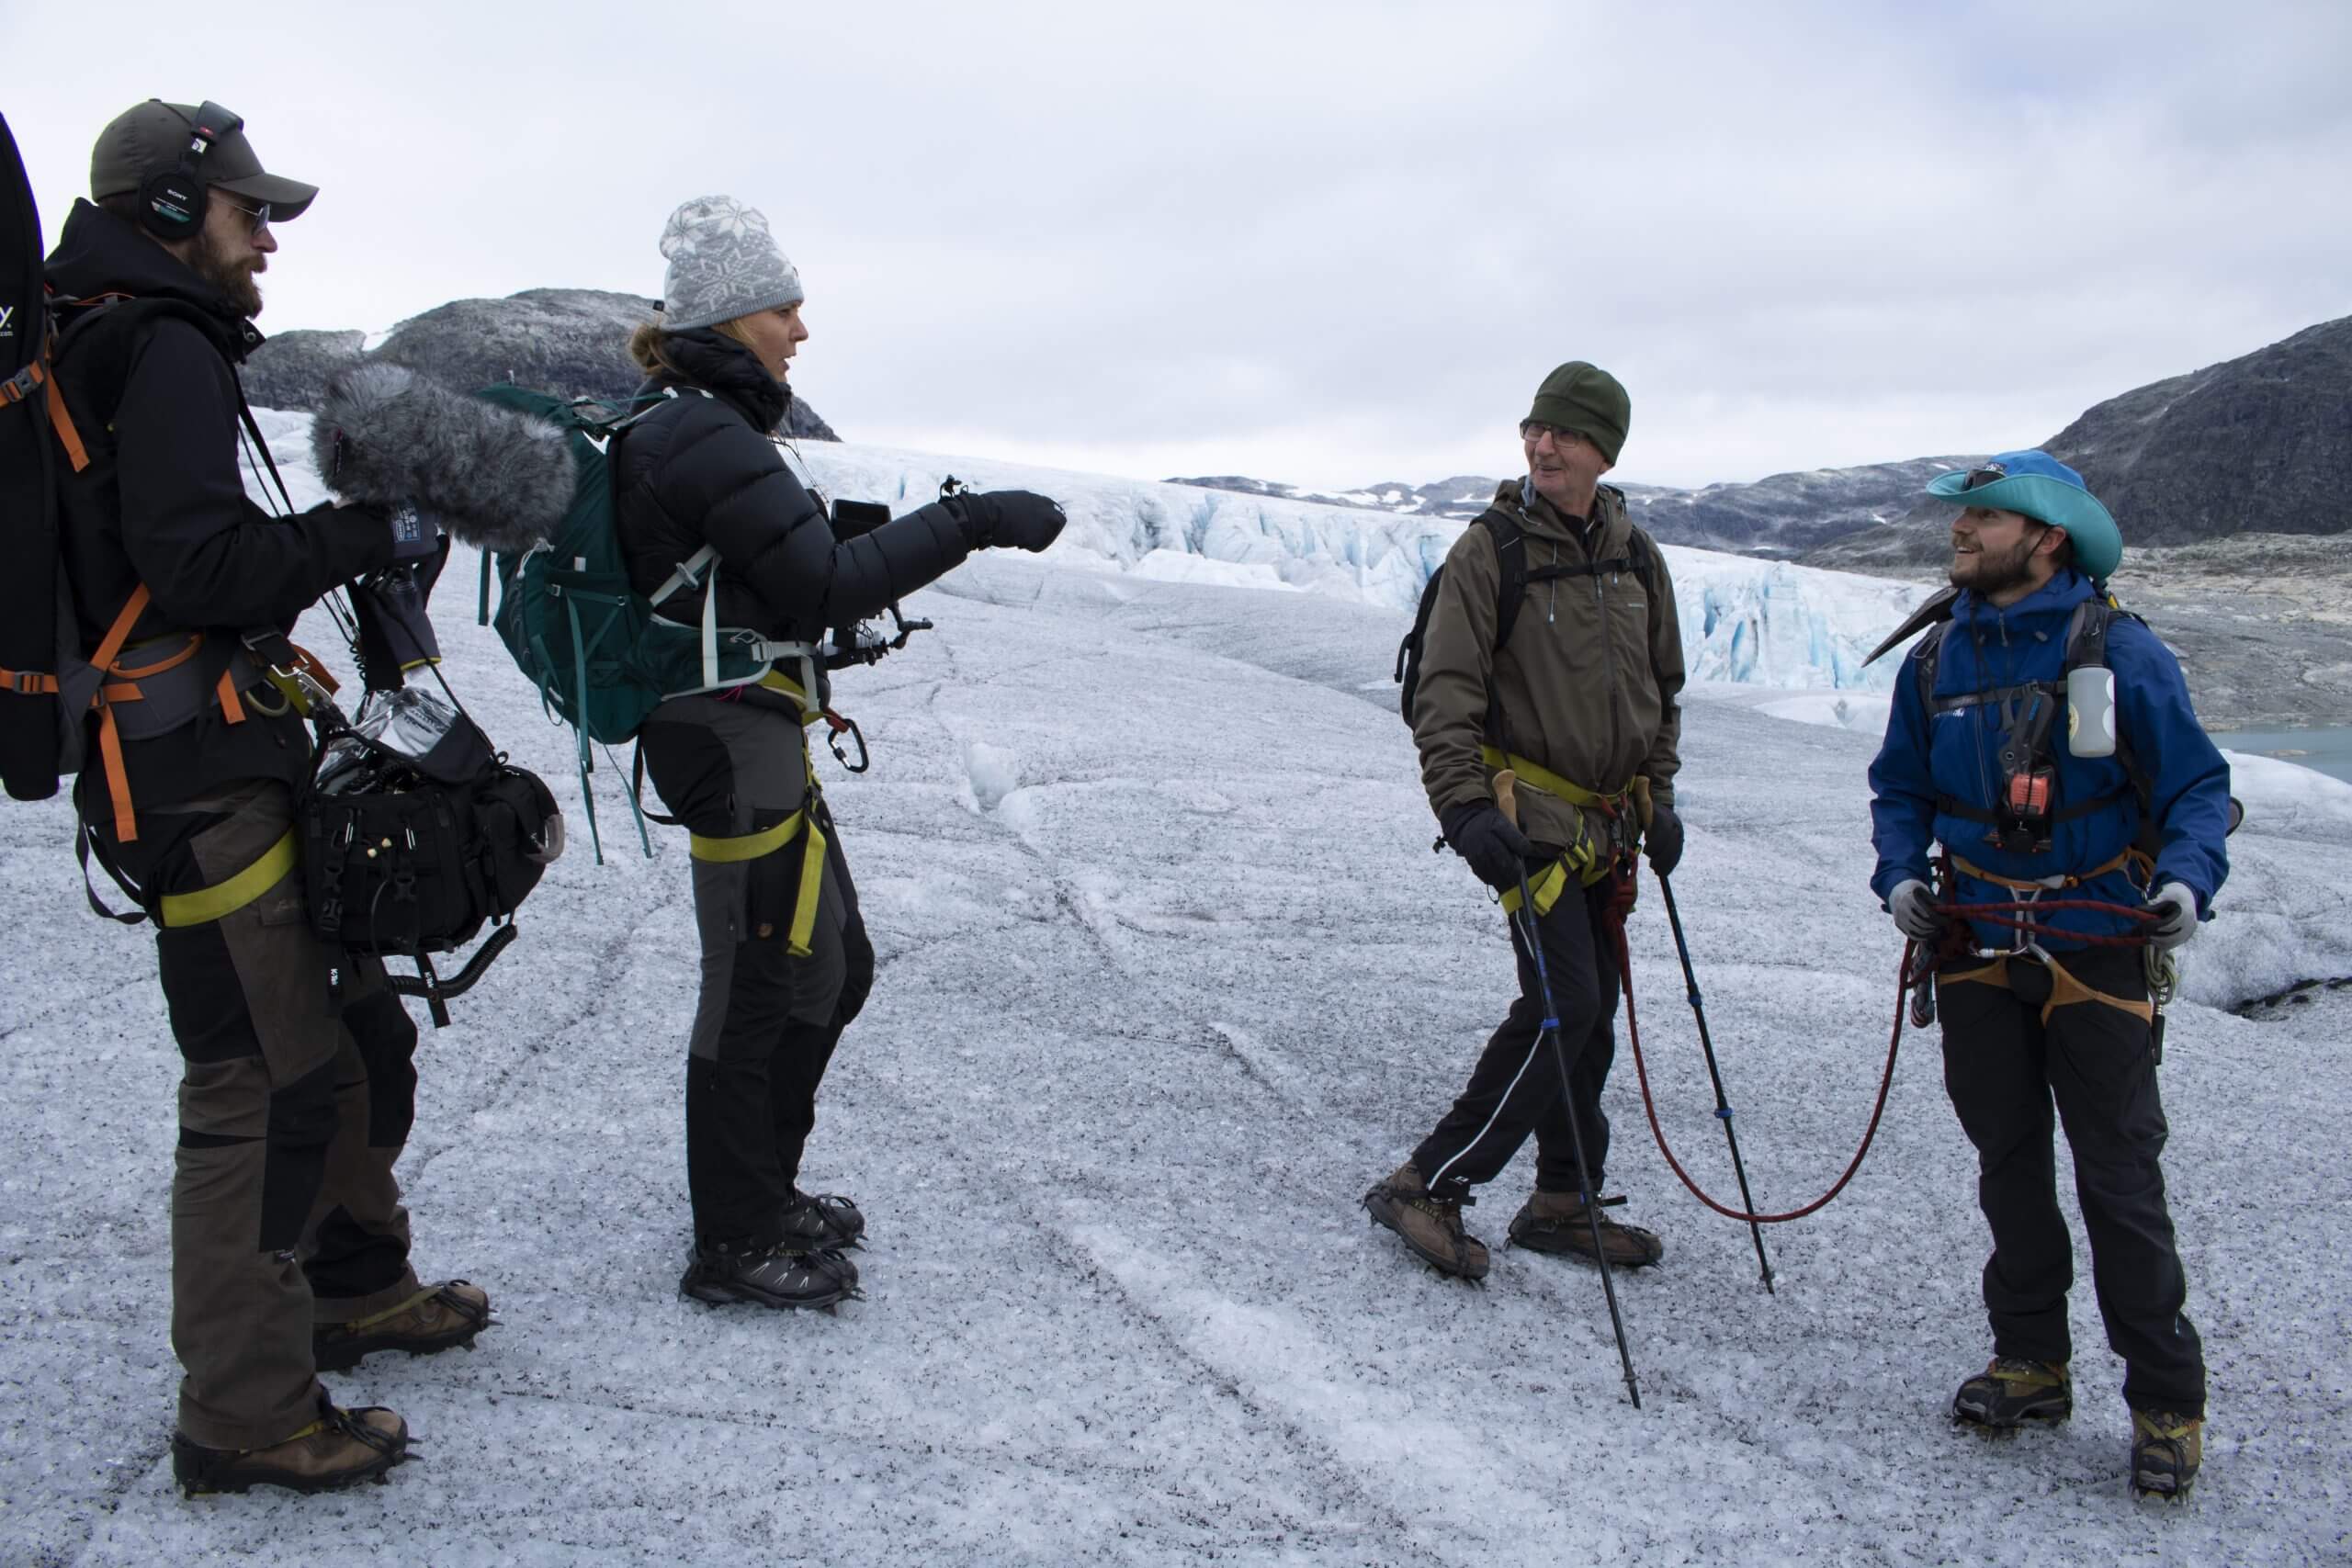 Margreth Olin with her father Jorgen Mykloen on Jostedalen Glacier, sound recordist Andreas Svensson and safety manager from IceTroll.